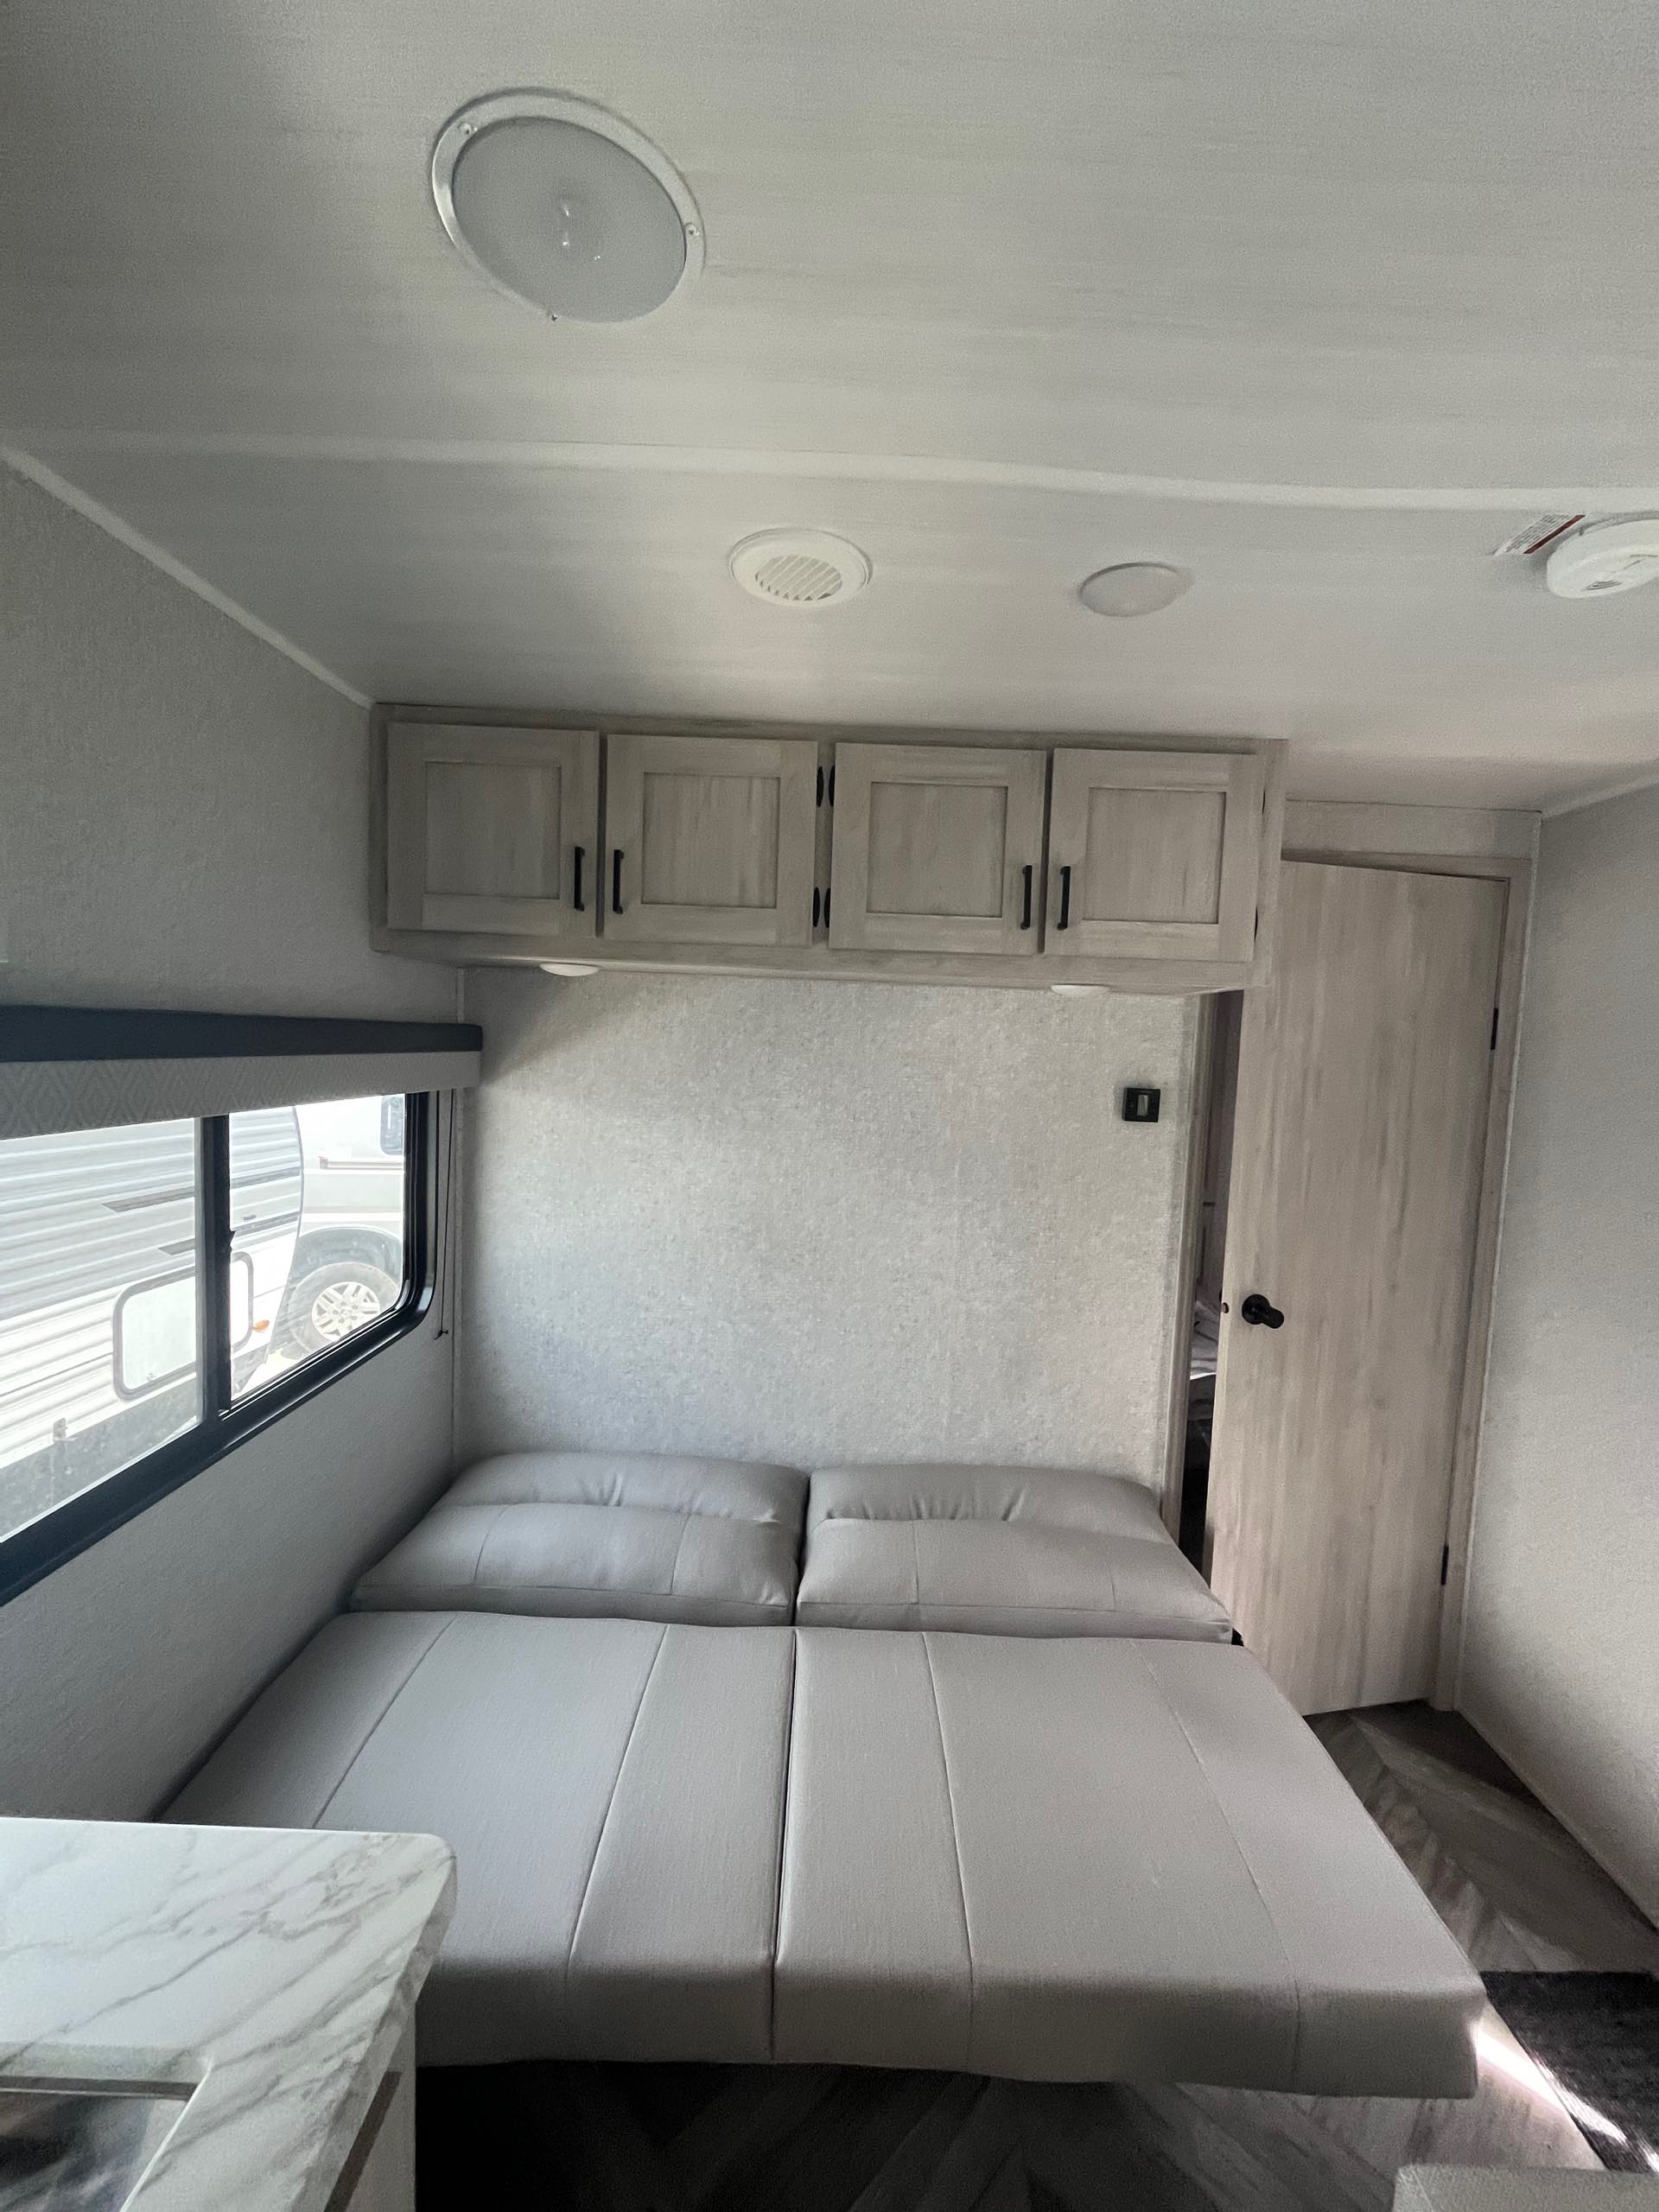 2022 East To West Della Terra 250BH at Prosser's Premium RV Outlet